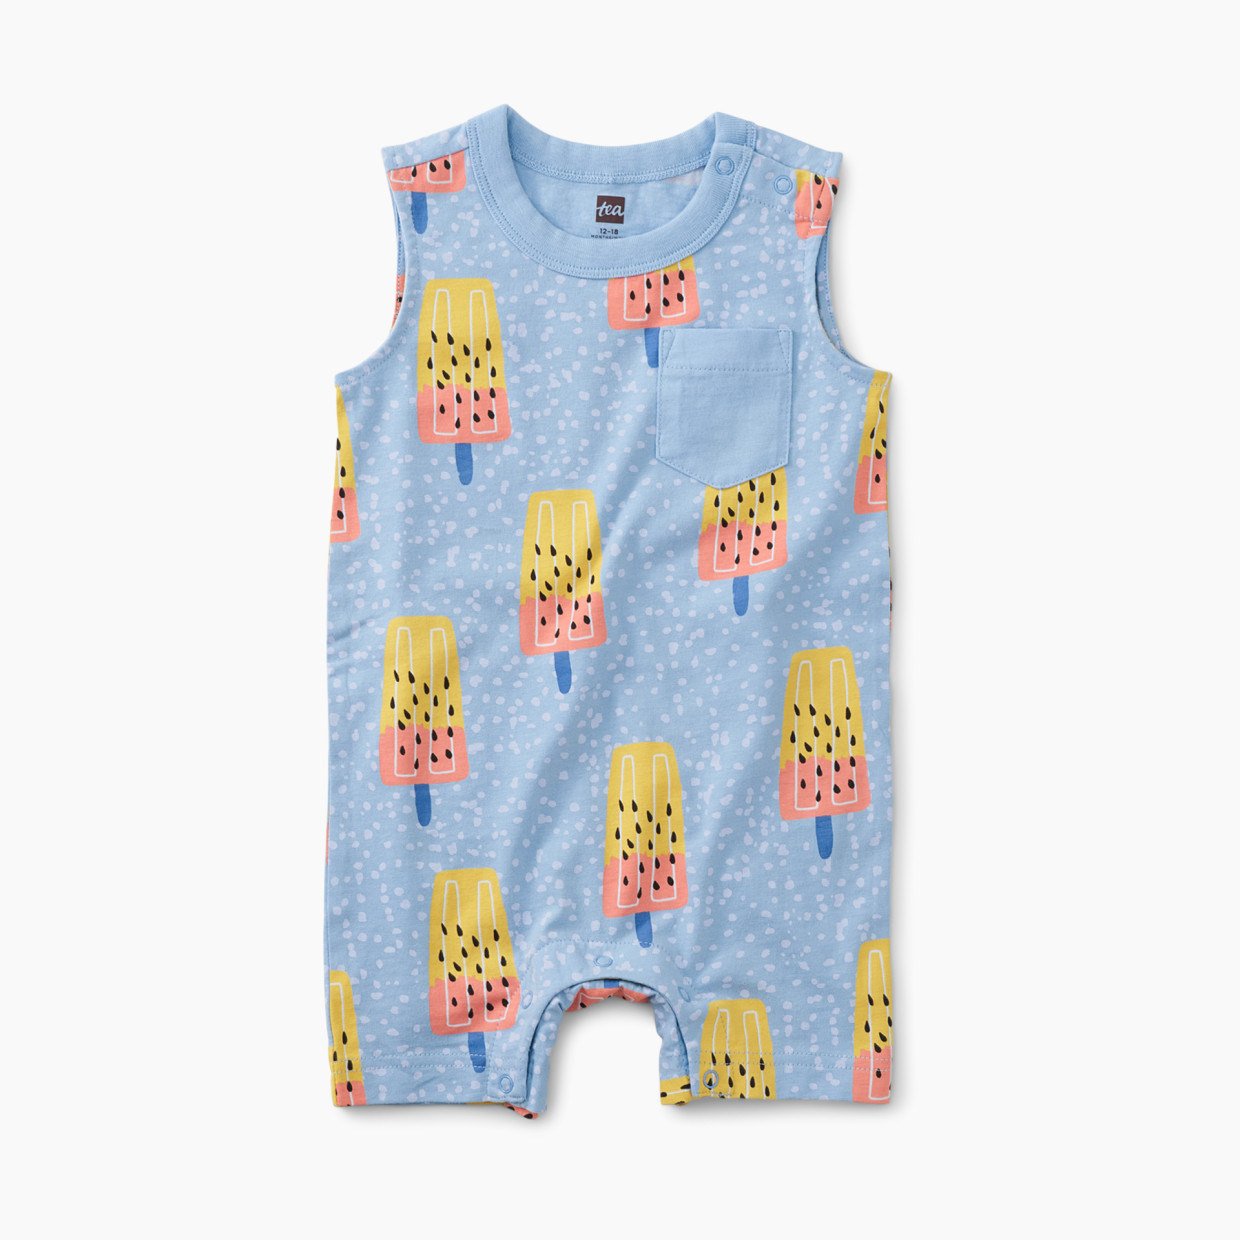 Tea Collection Pocket Tank Baby Romper - Melon Popsicle, 0-3 Months.